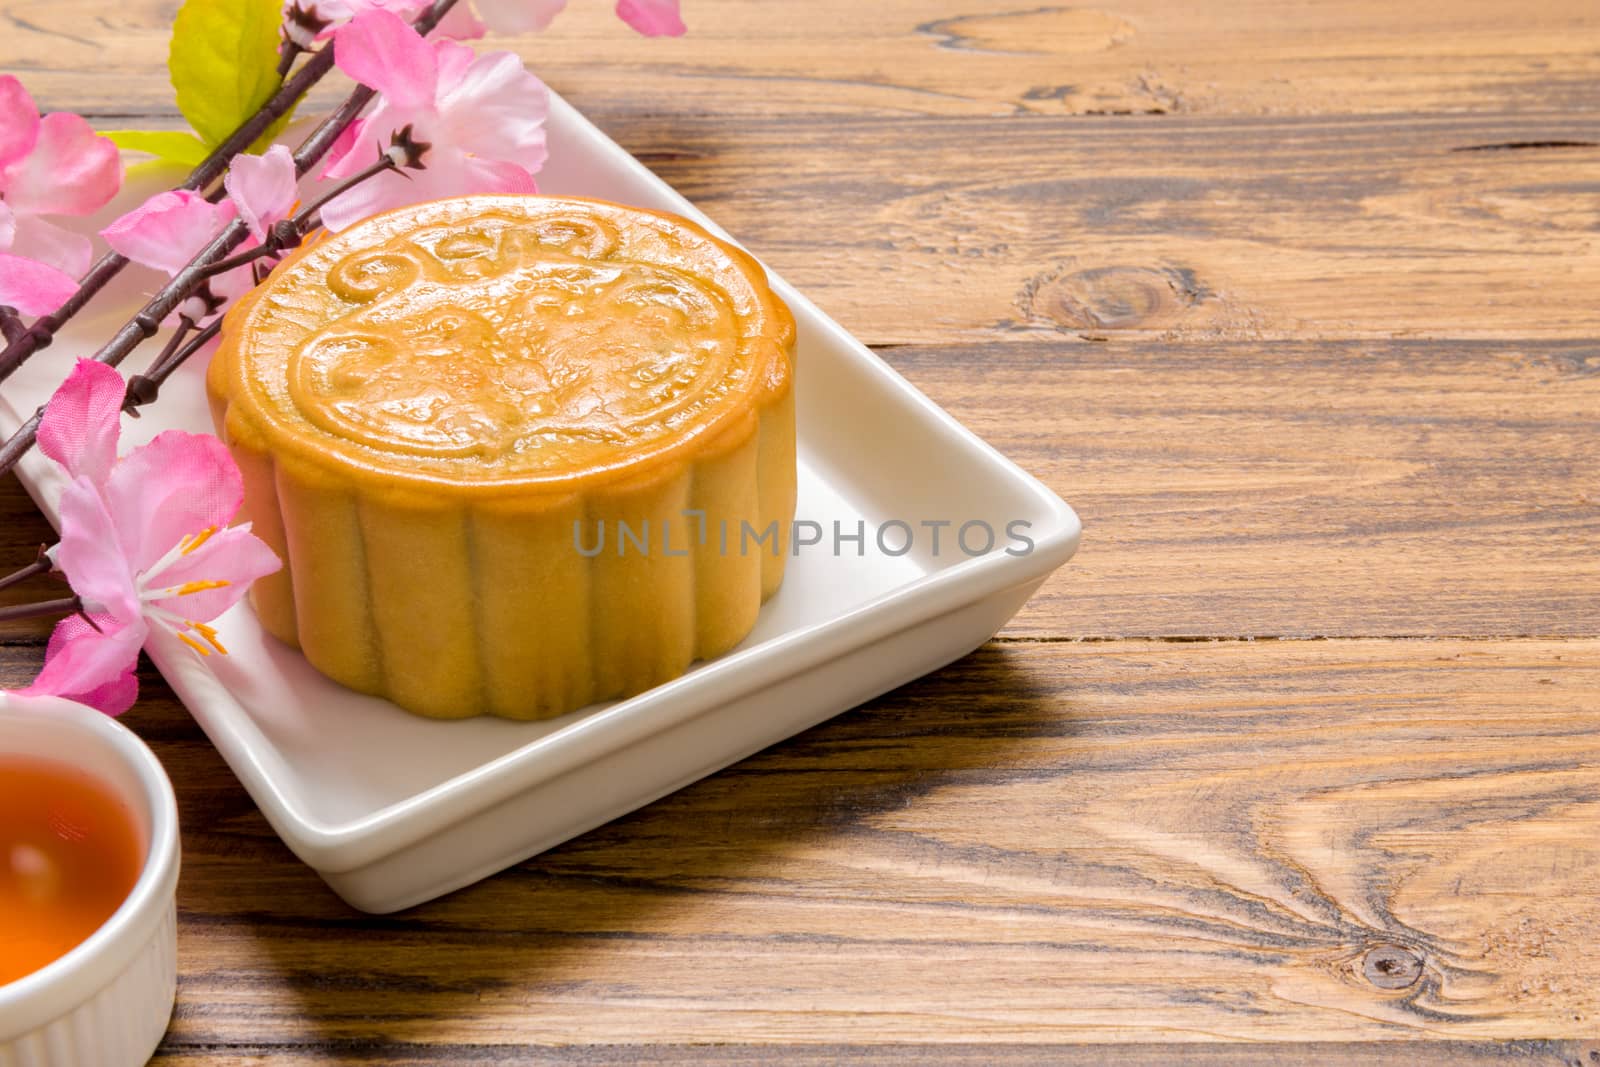 Traditional Chinese mooncake eaten with hot tea for relaxing time.